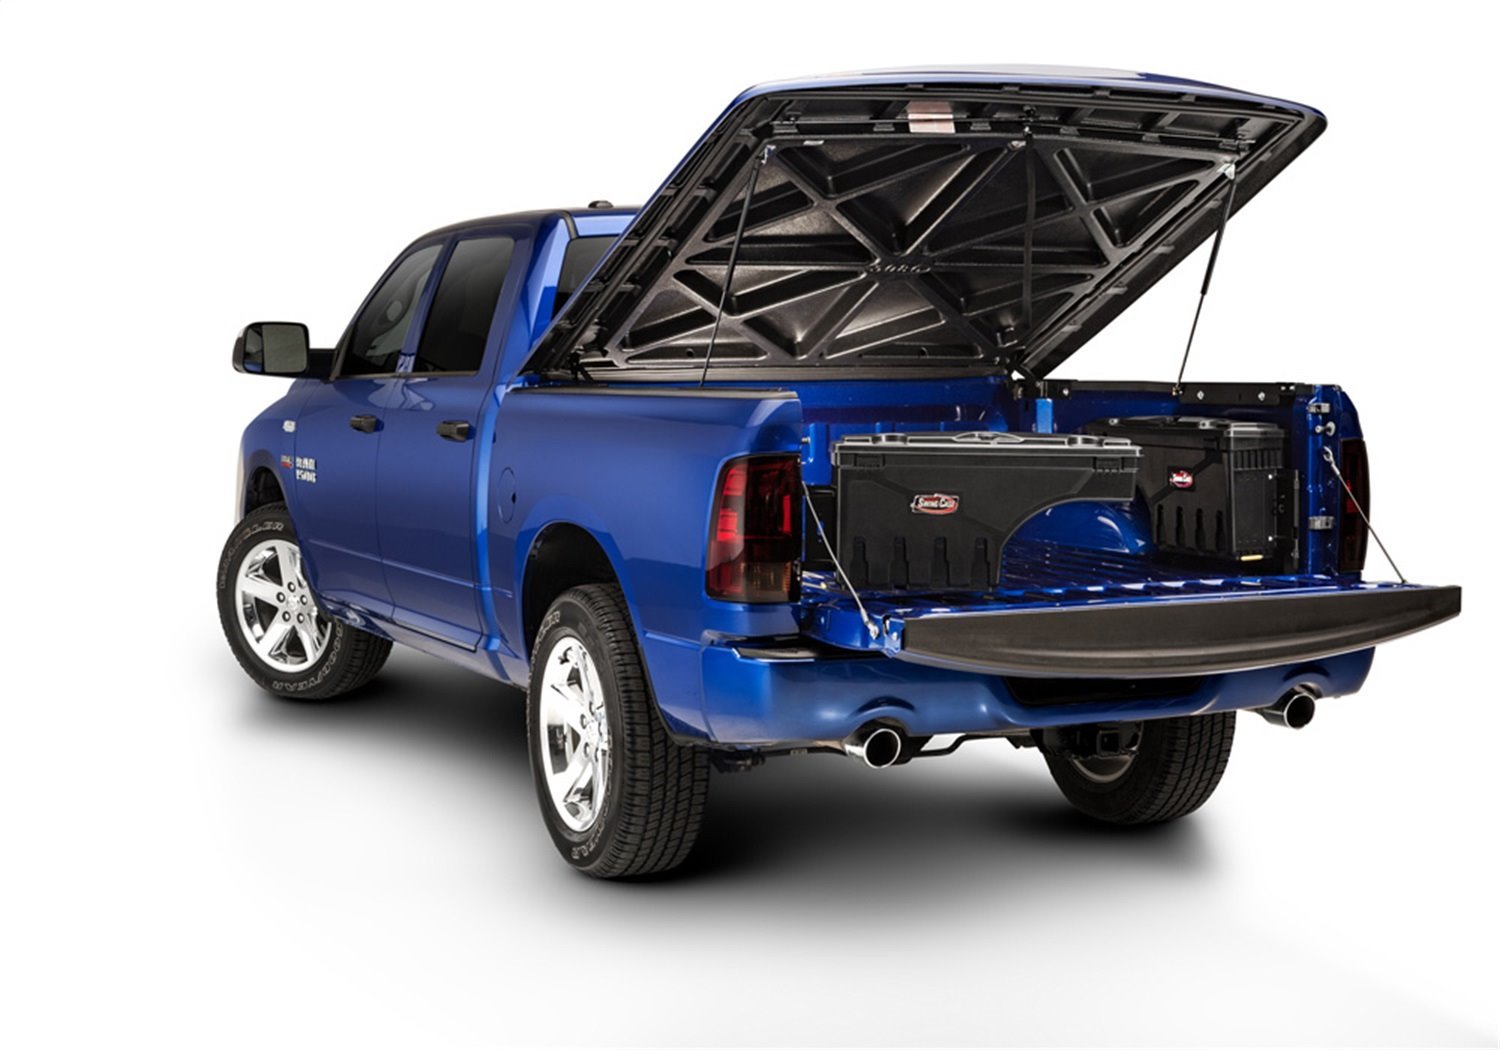 SC201D Swing Case, 1999-2014 Ford F-150 Styleside Drivers Side, Black, Will not fit 2000-2004 Heritage SuperCrew